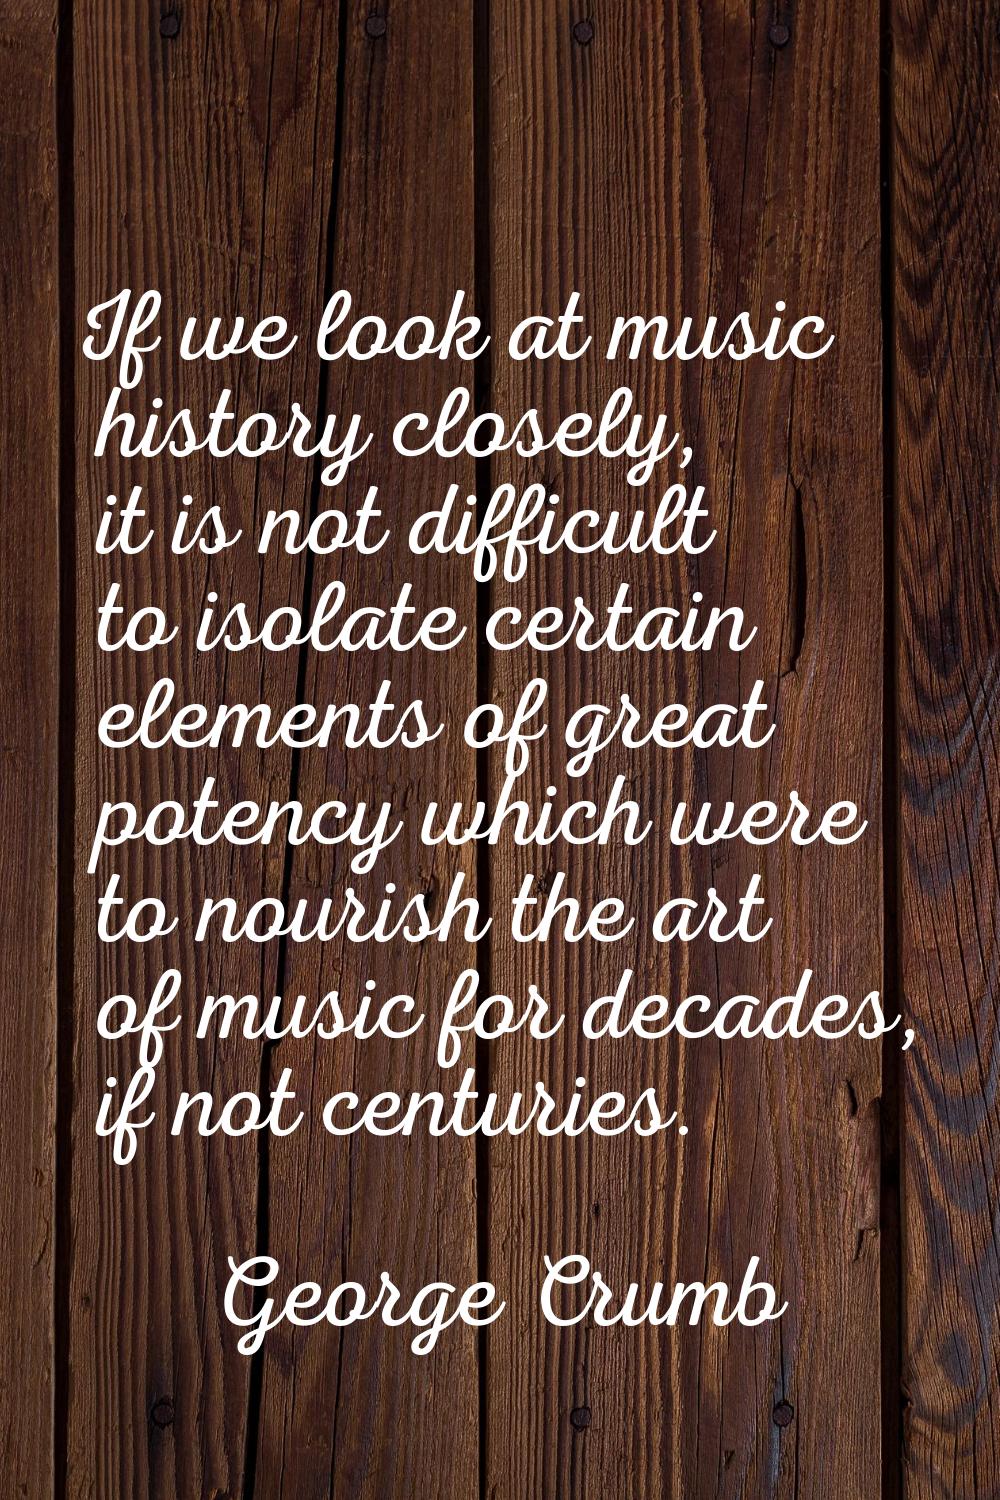 If we look at music history closely, it is not difficult to isolate certain elements of great poten